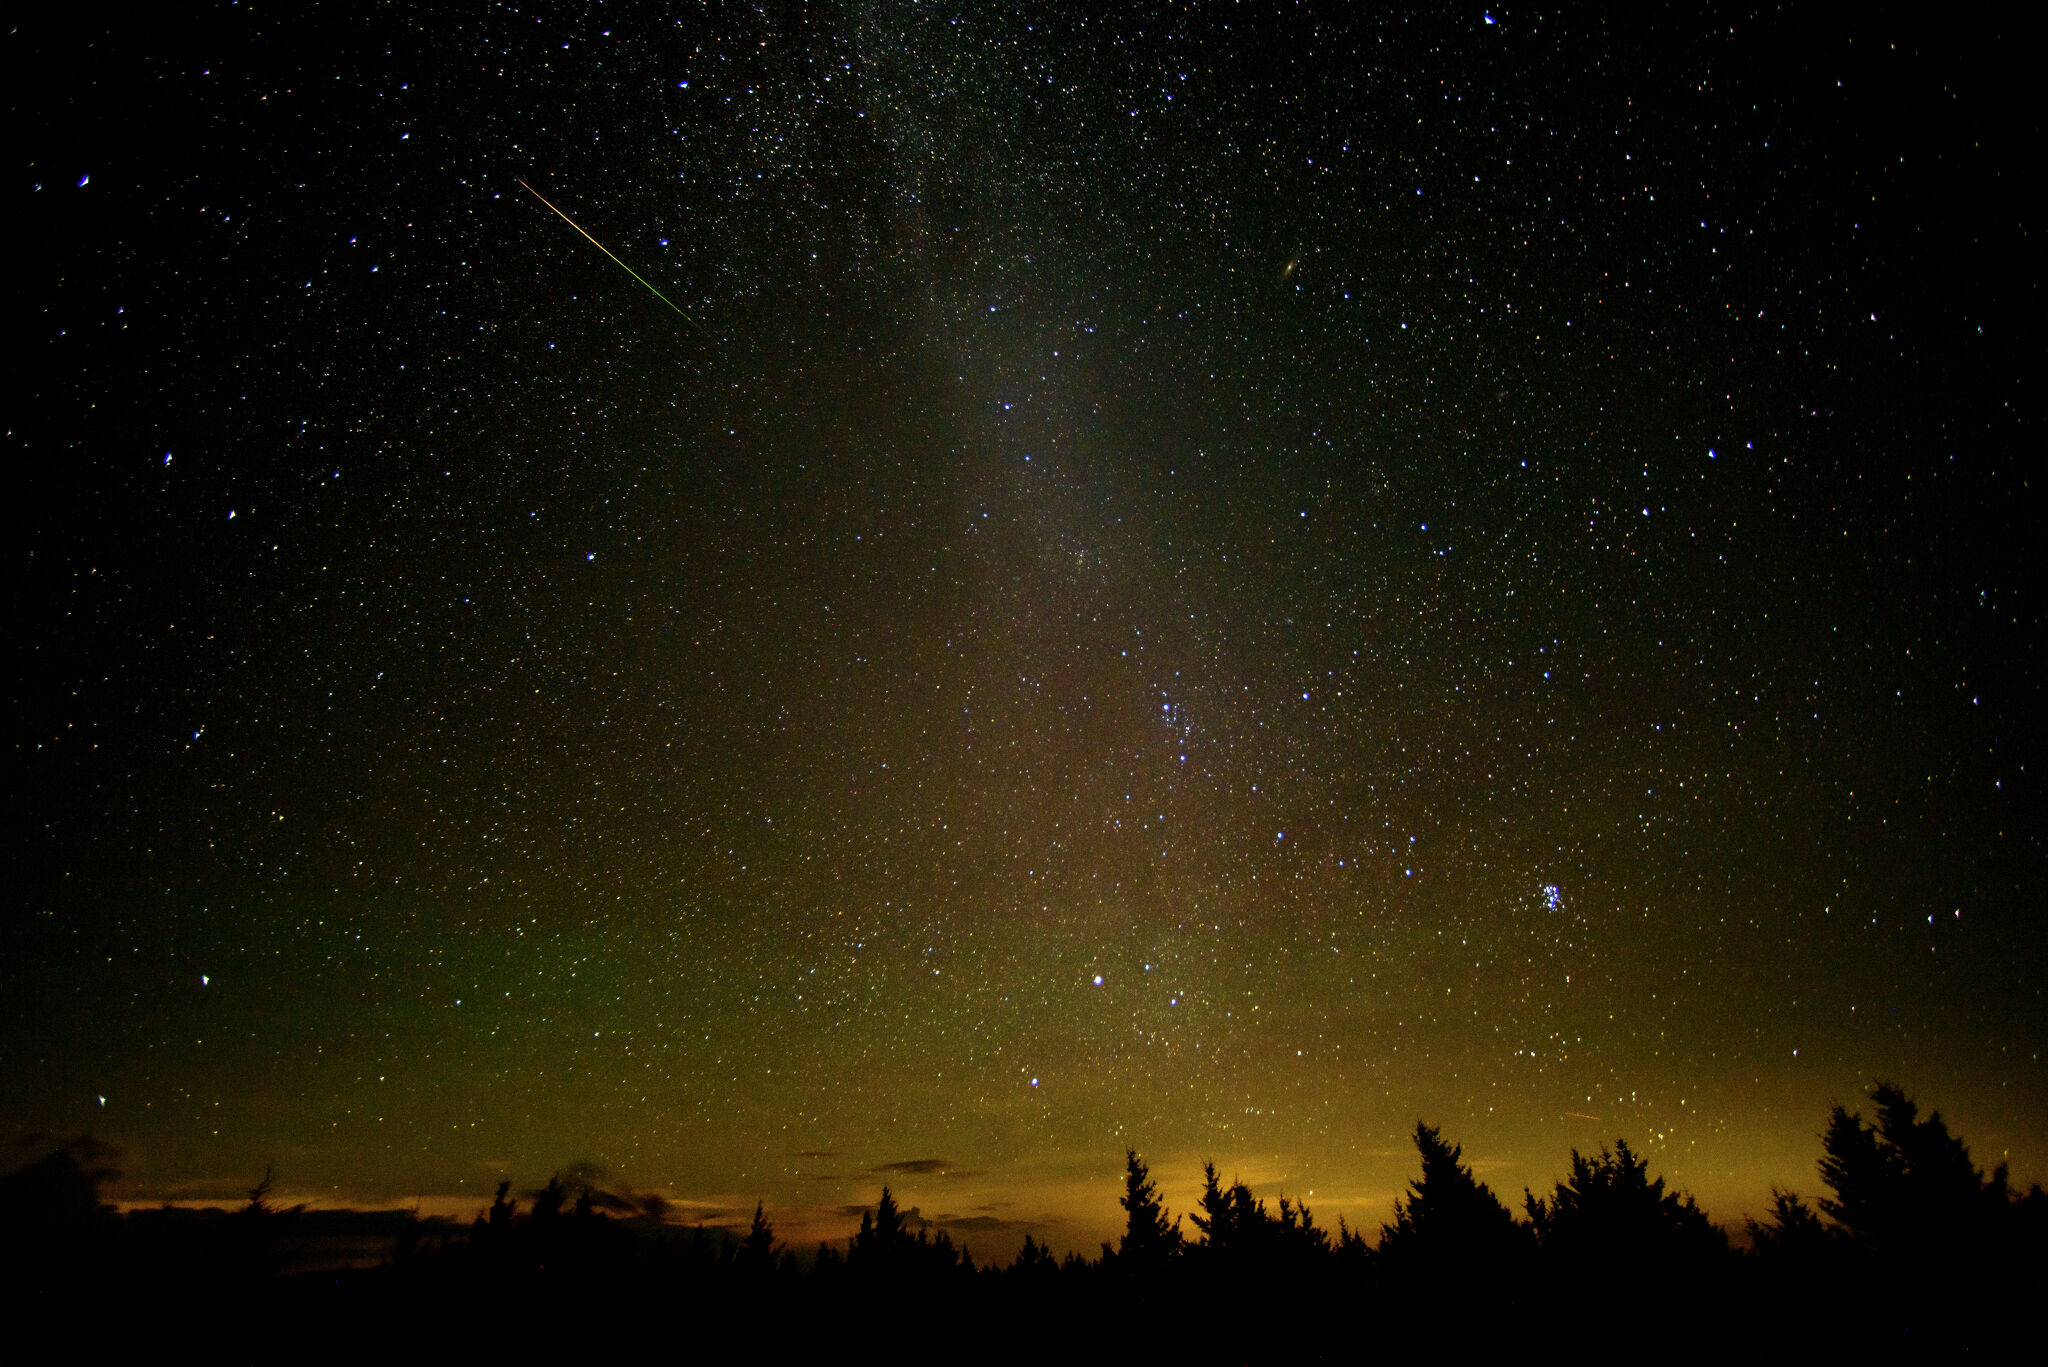 Perseid meteor shower: Map shows where to watch in California